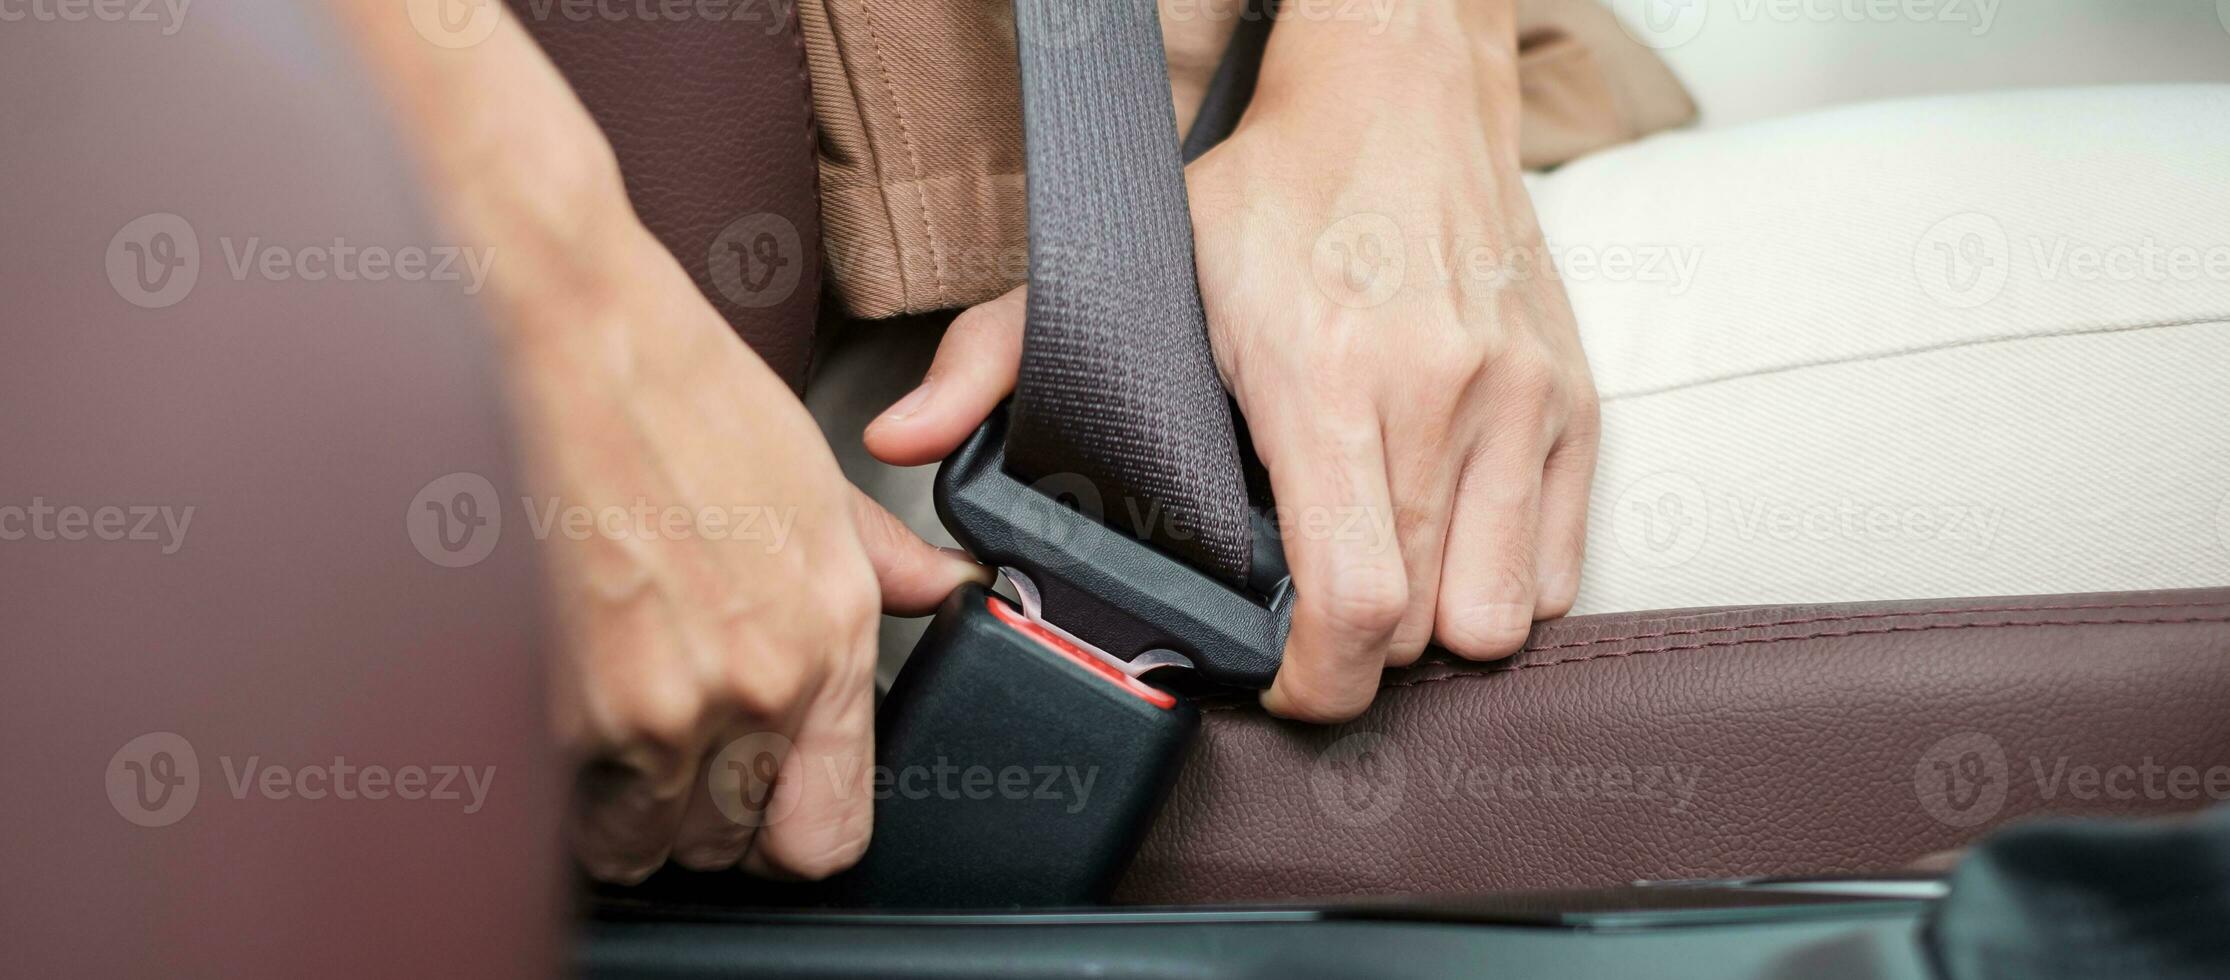 woman driver hand fastening seat belt during sitting inside a car and driving in the road. safety, trip, journey and transport concept photo